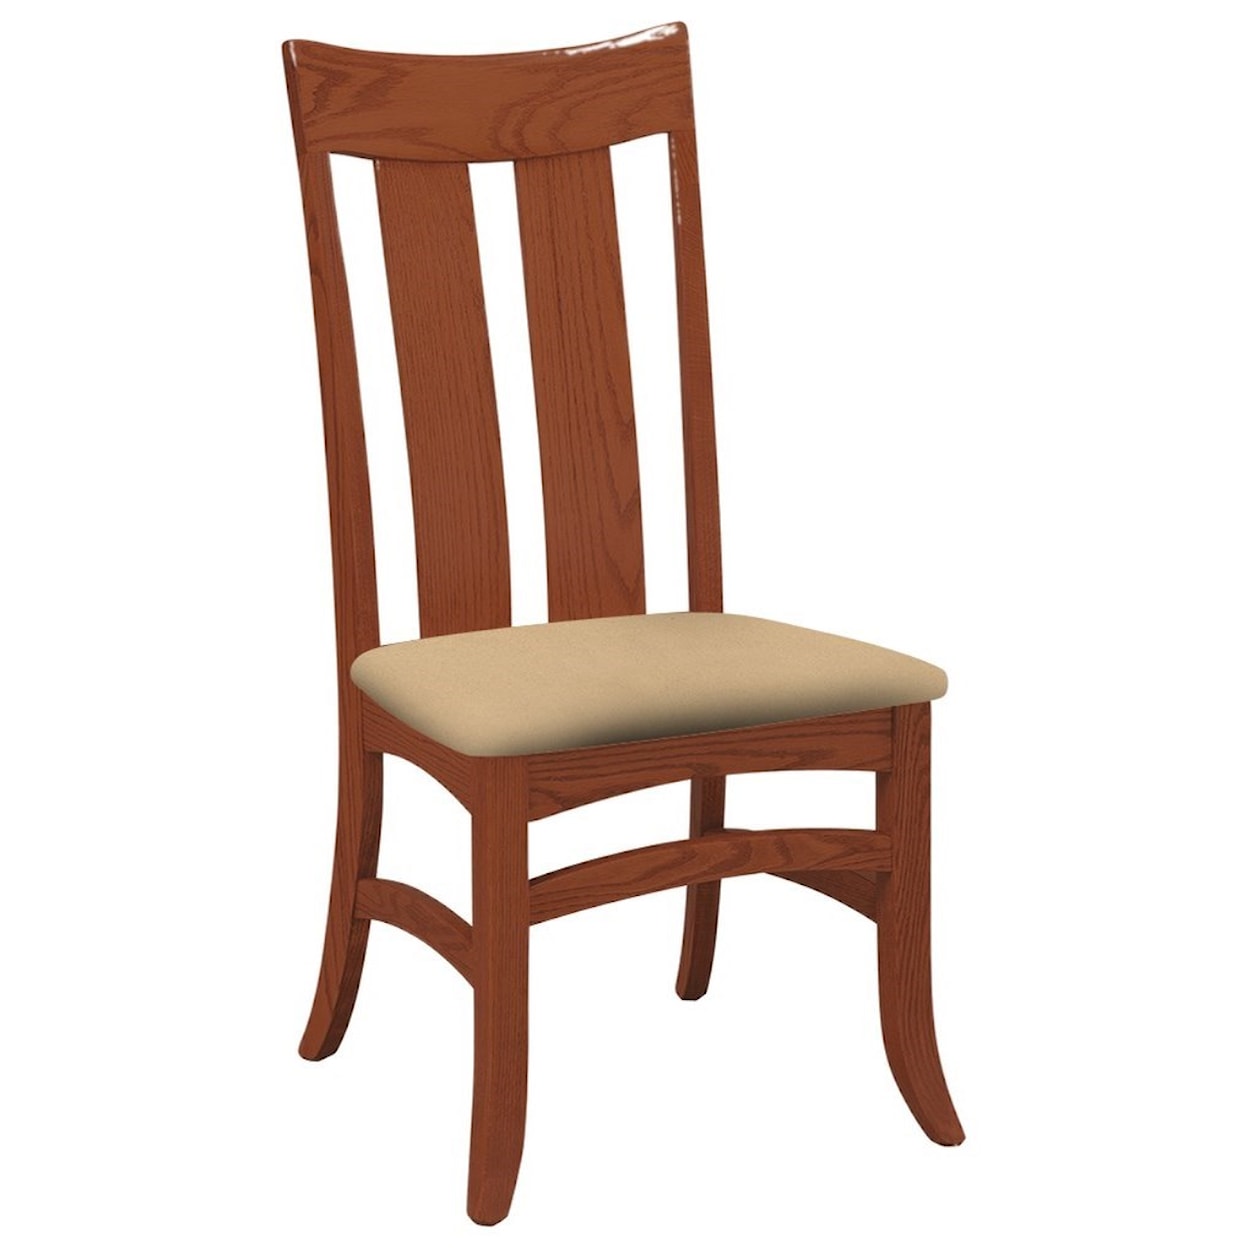 Daniel's Amish Chairs and Barstools Galveston Side Chair